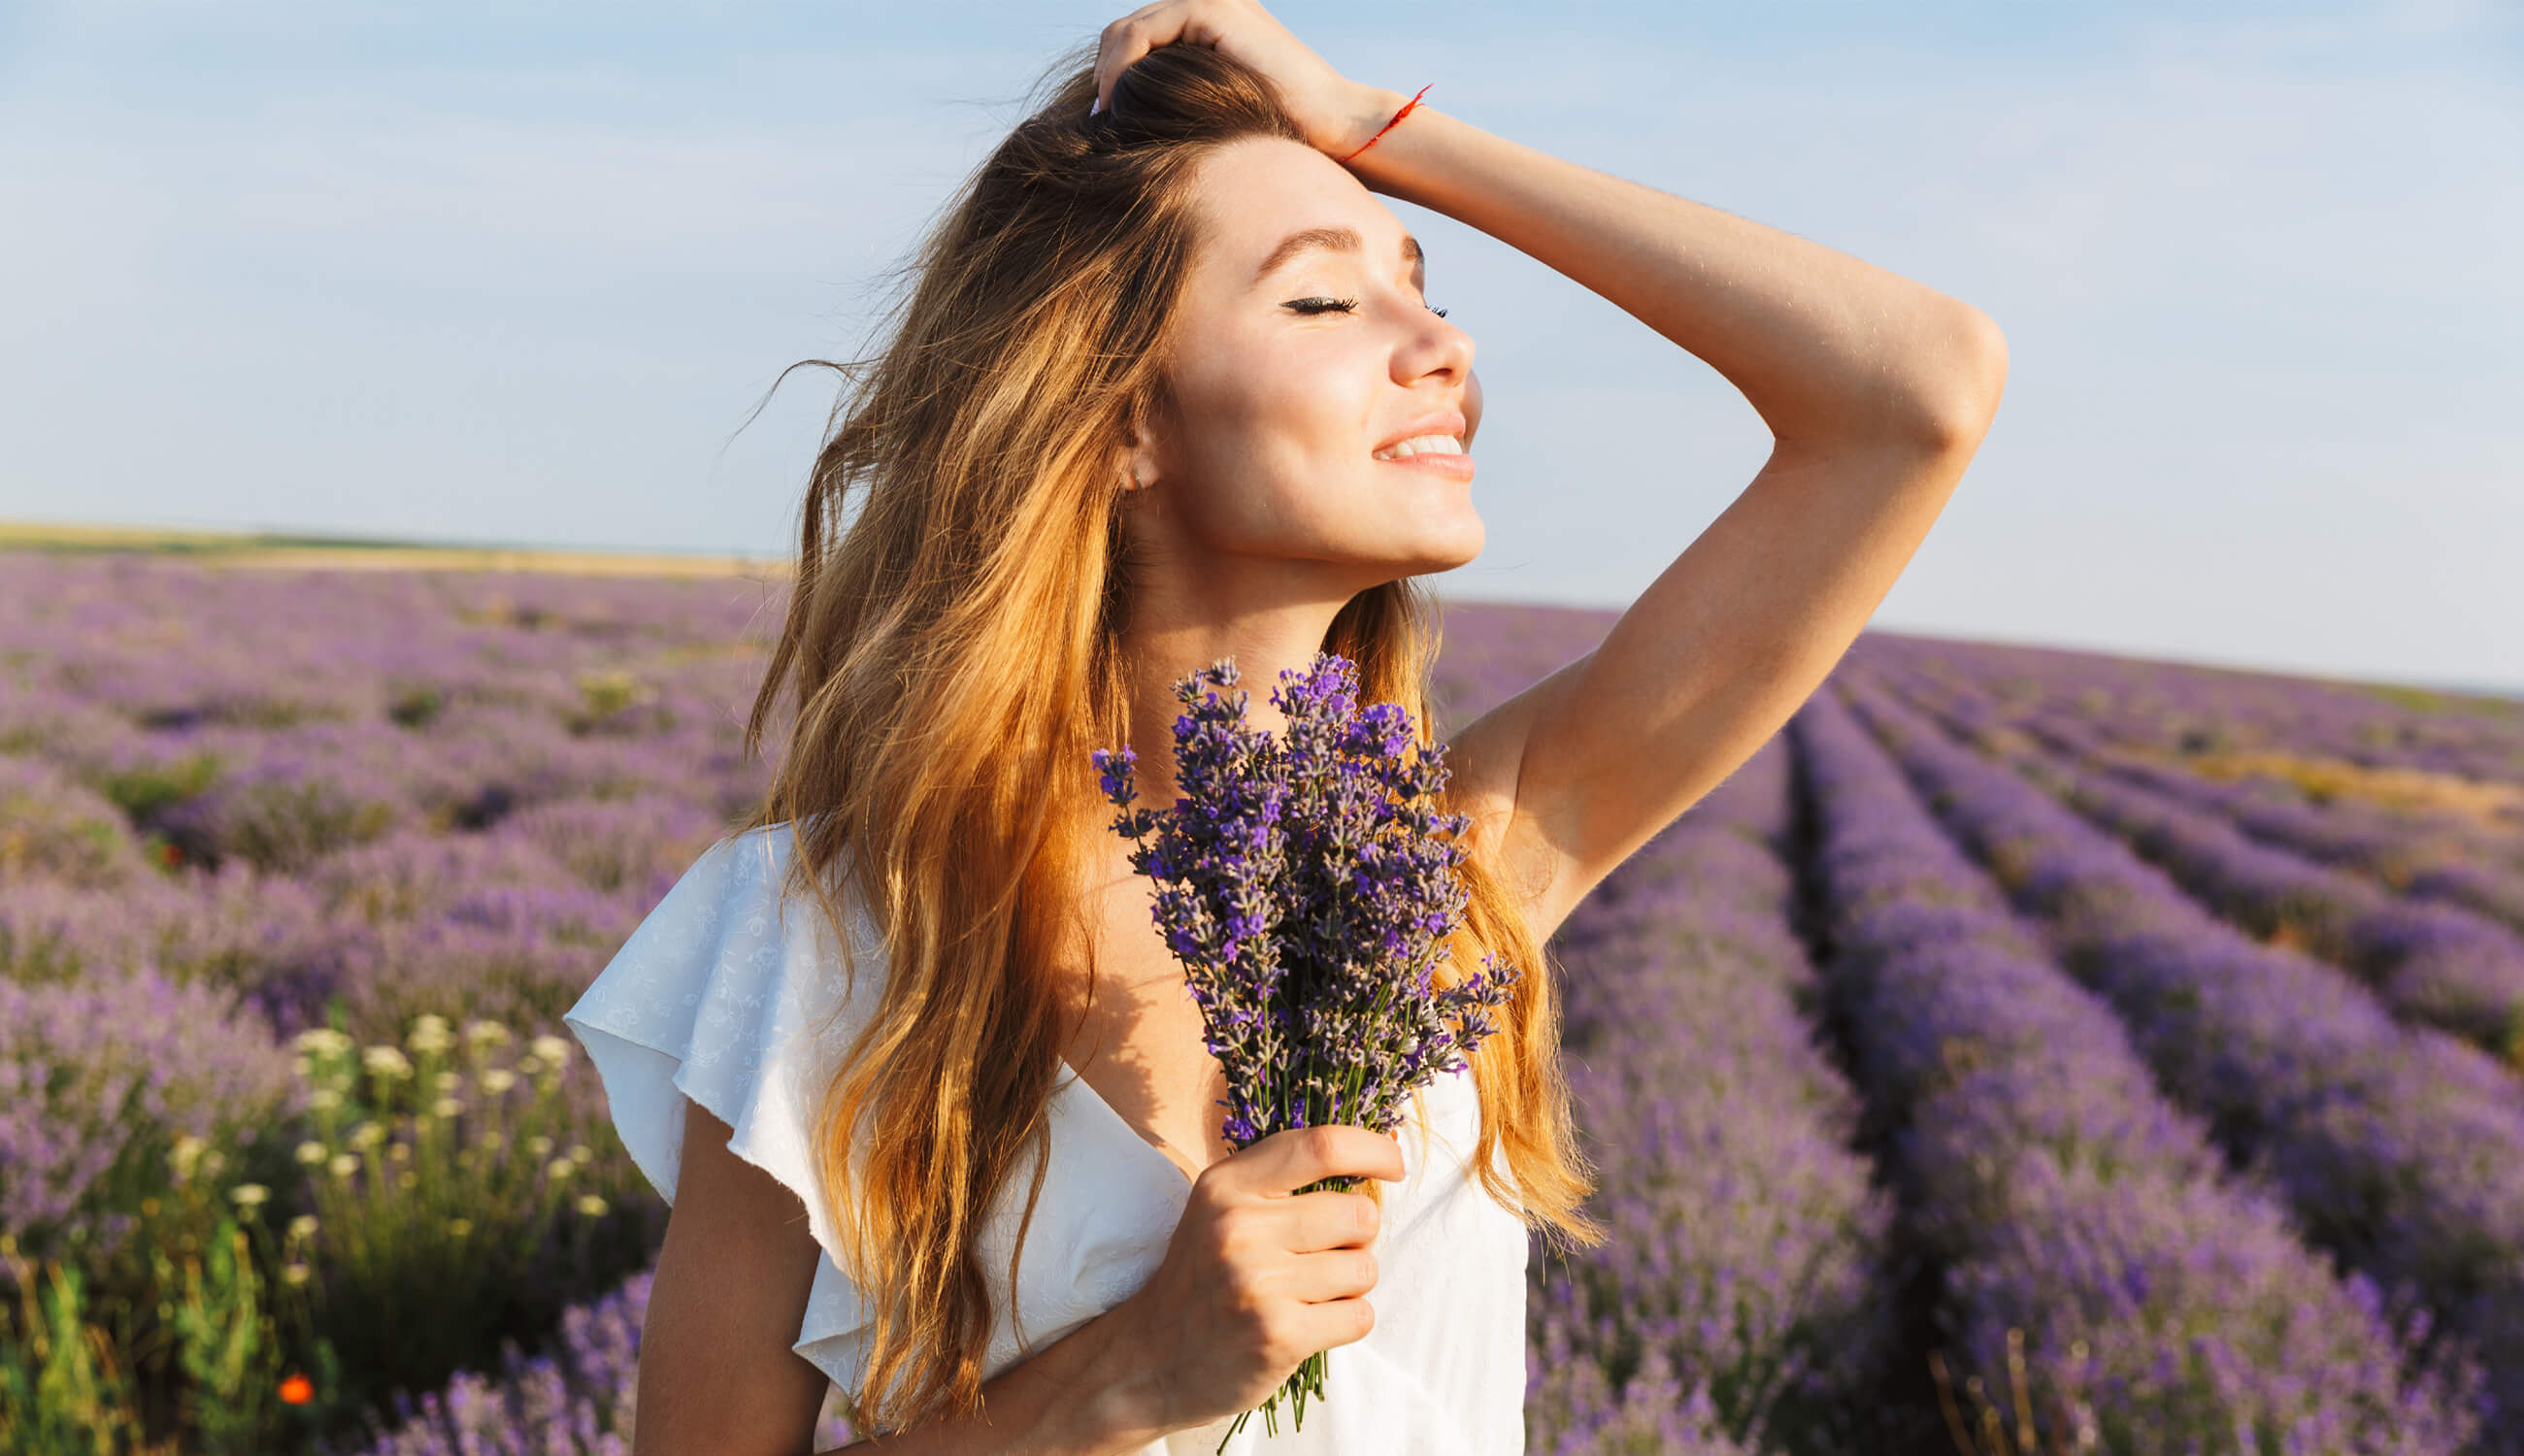 Lavender Essential Oil: A great oil for all skin types and needs